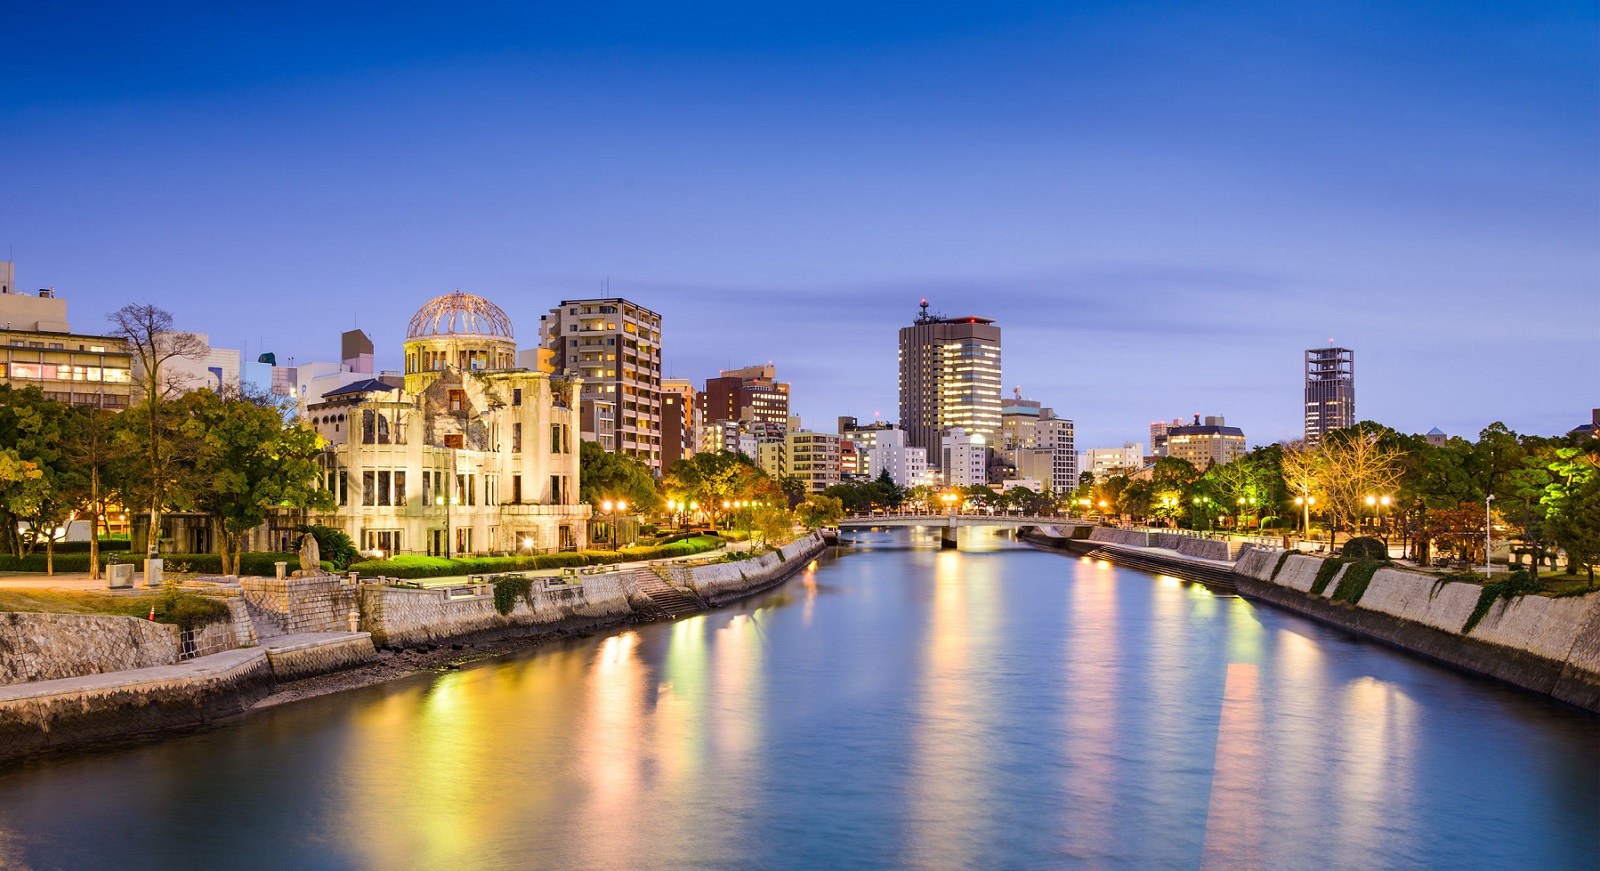 Hiroshima - Things to see, things to eat, what to buy, things to do, and  things to know